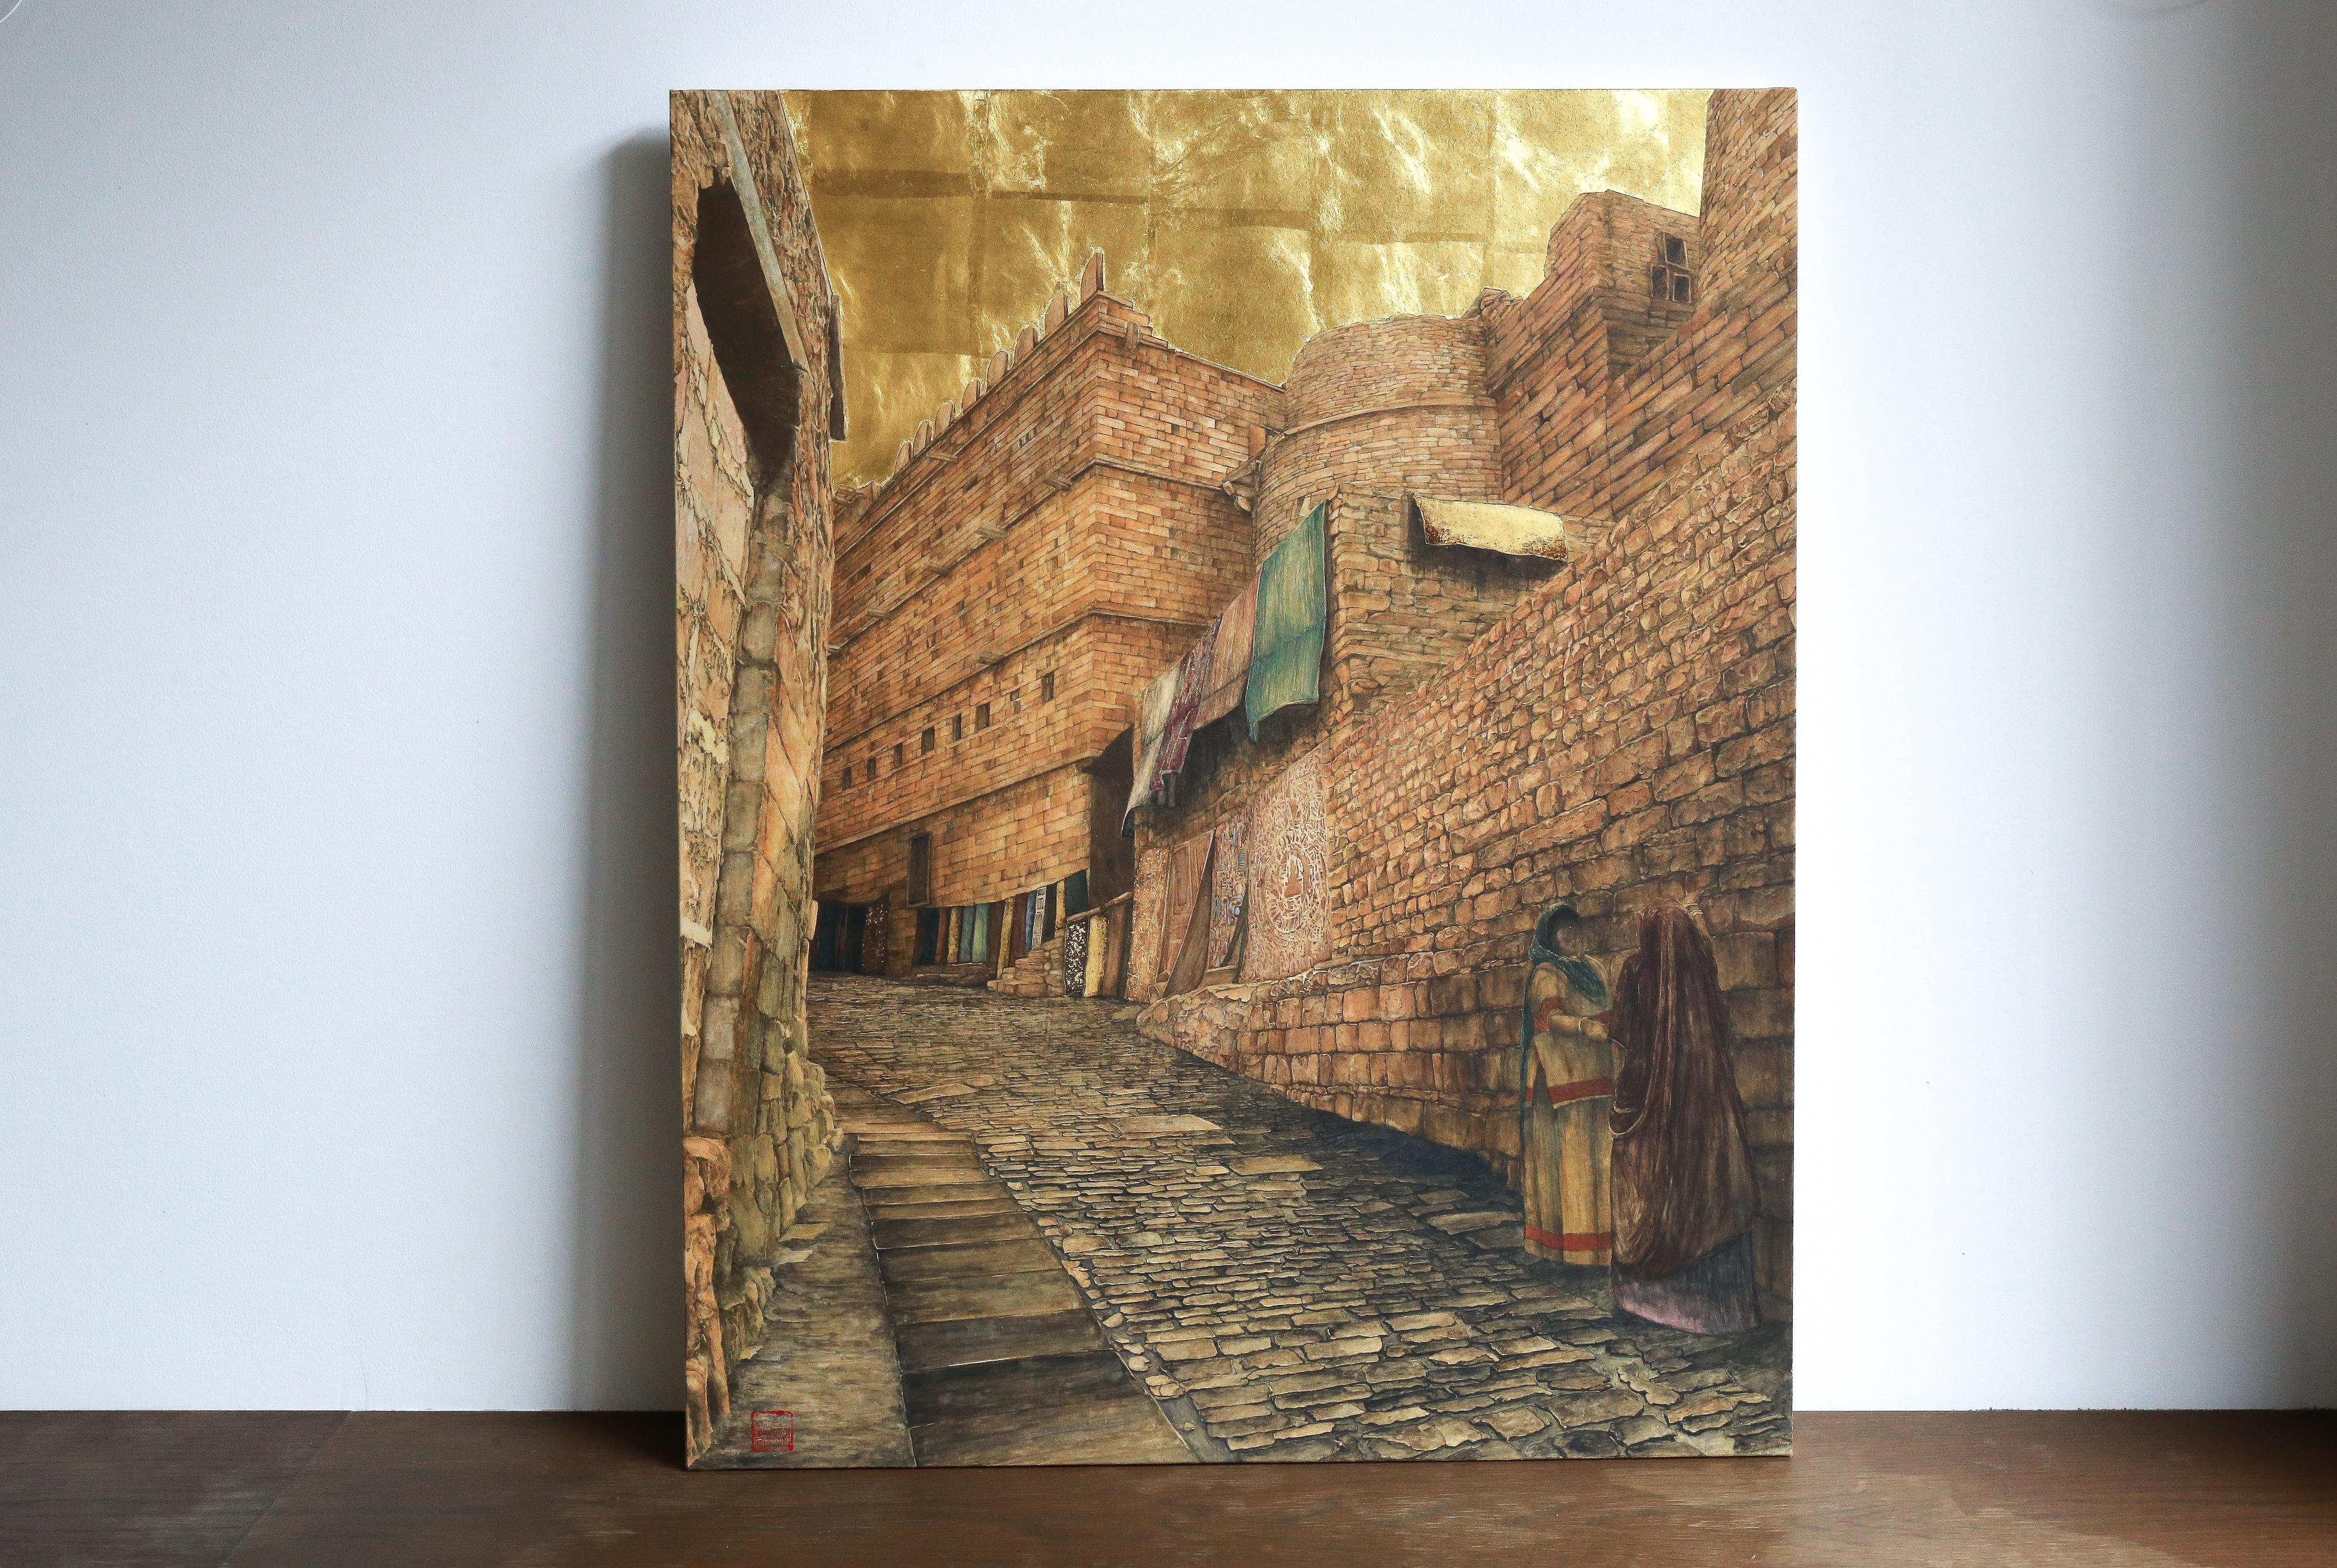 Street of Jaisalmer - Gold Leaf, Mineral and Ores Painting, Streetscape Realism - Brown Landscape Painting by Maria Mitsumori